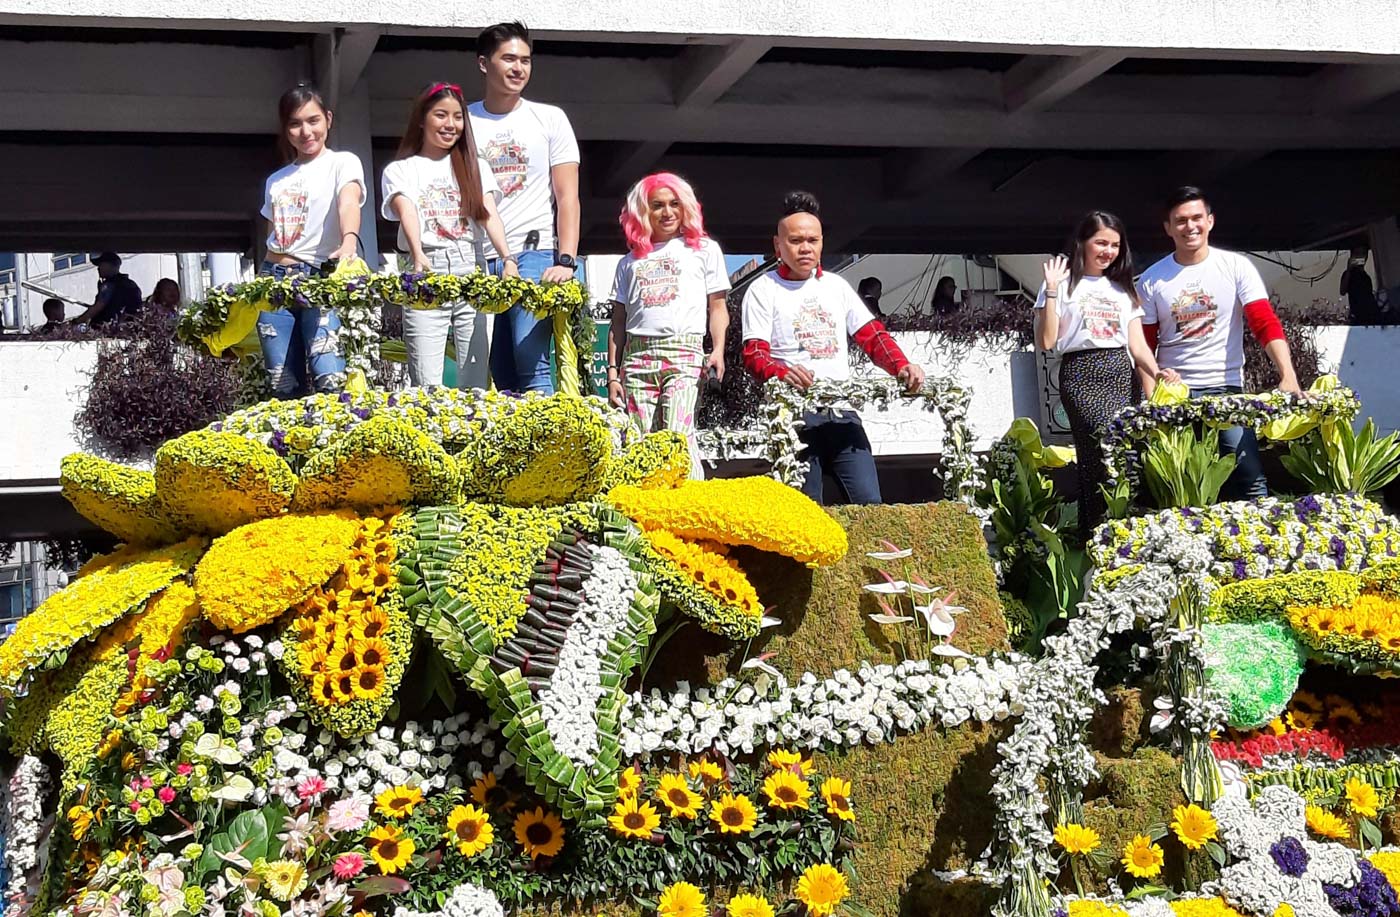 GMA 7. Janune Gutierrez and Tome Rodriguez lead GMA 7's float in the festival.  